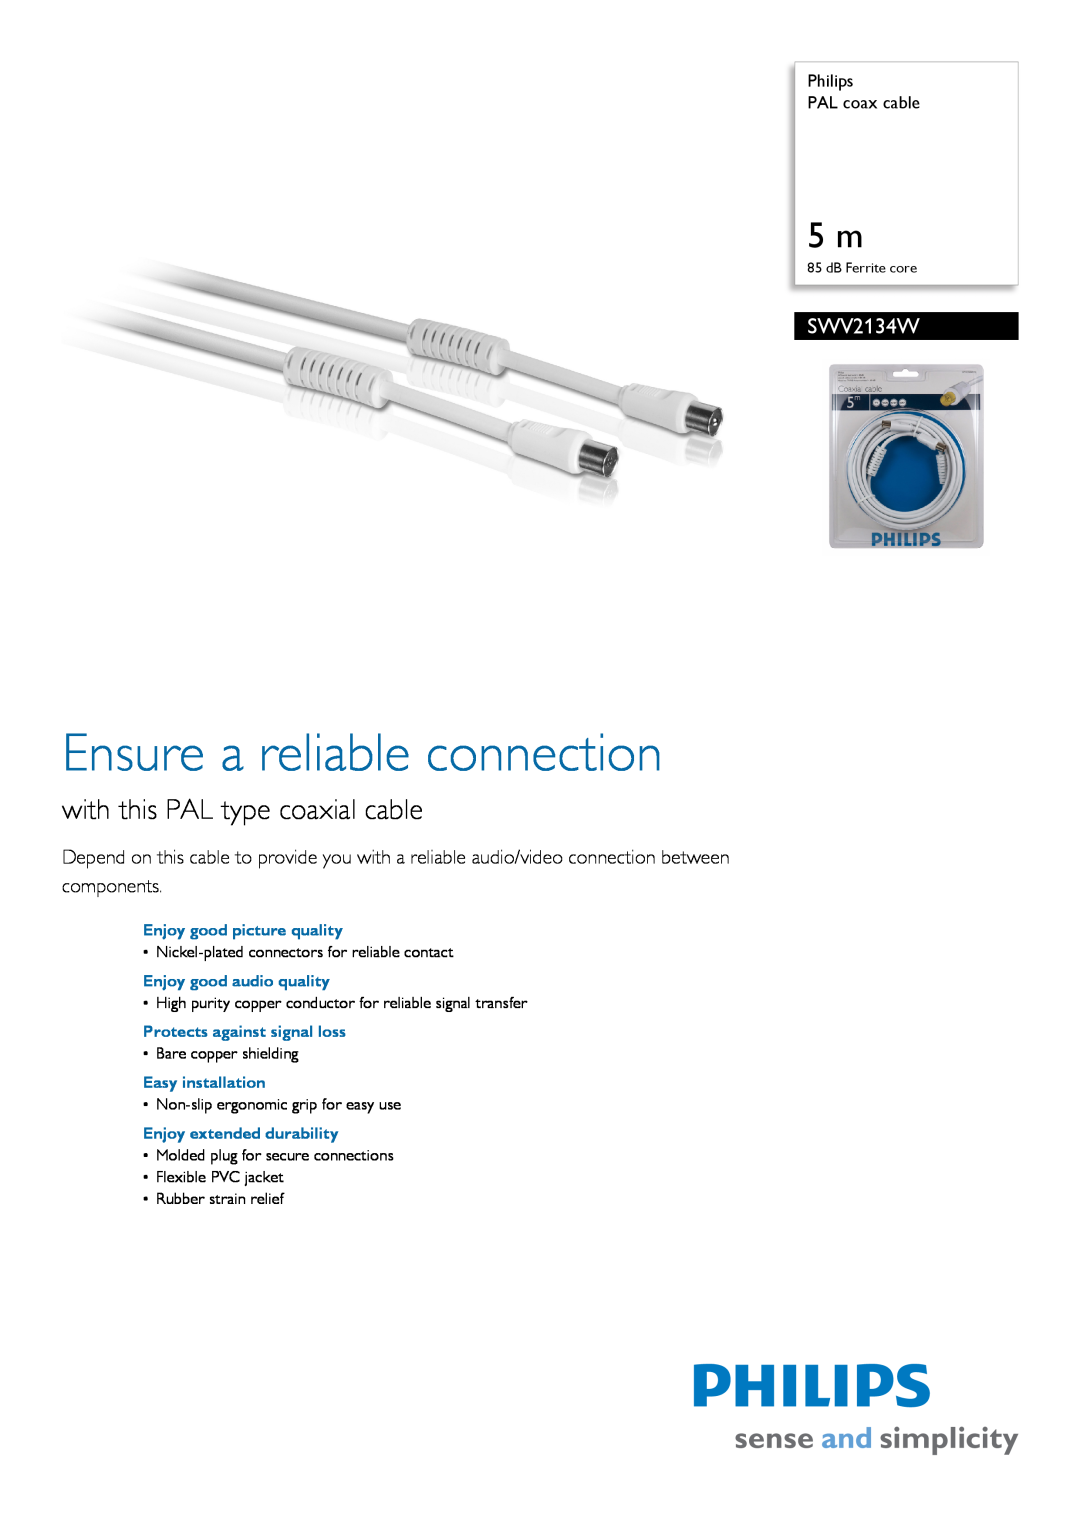 Philips SWV2134W manual Philips PAL coax cable, Ensure a reliable connection, with this PAL type coaxial cable 